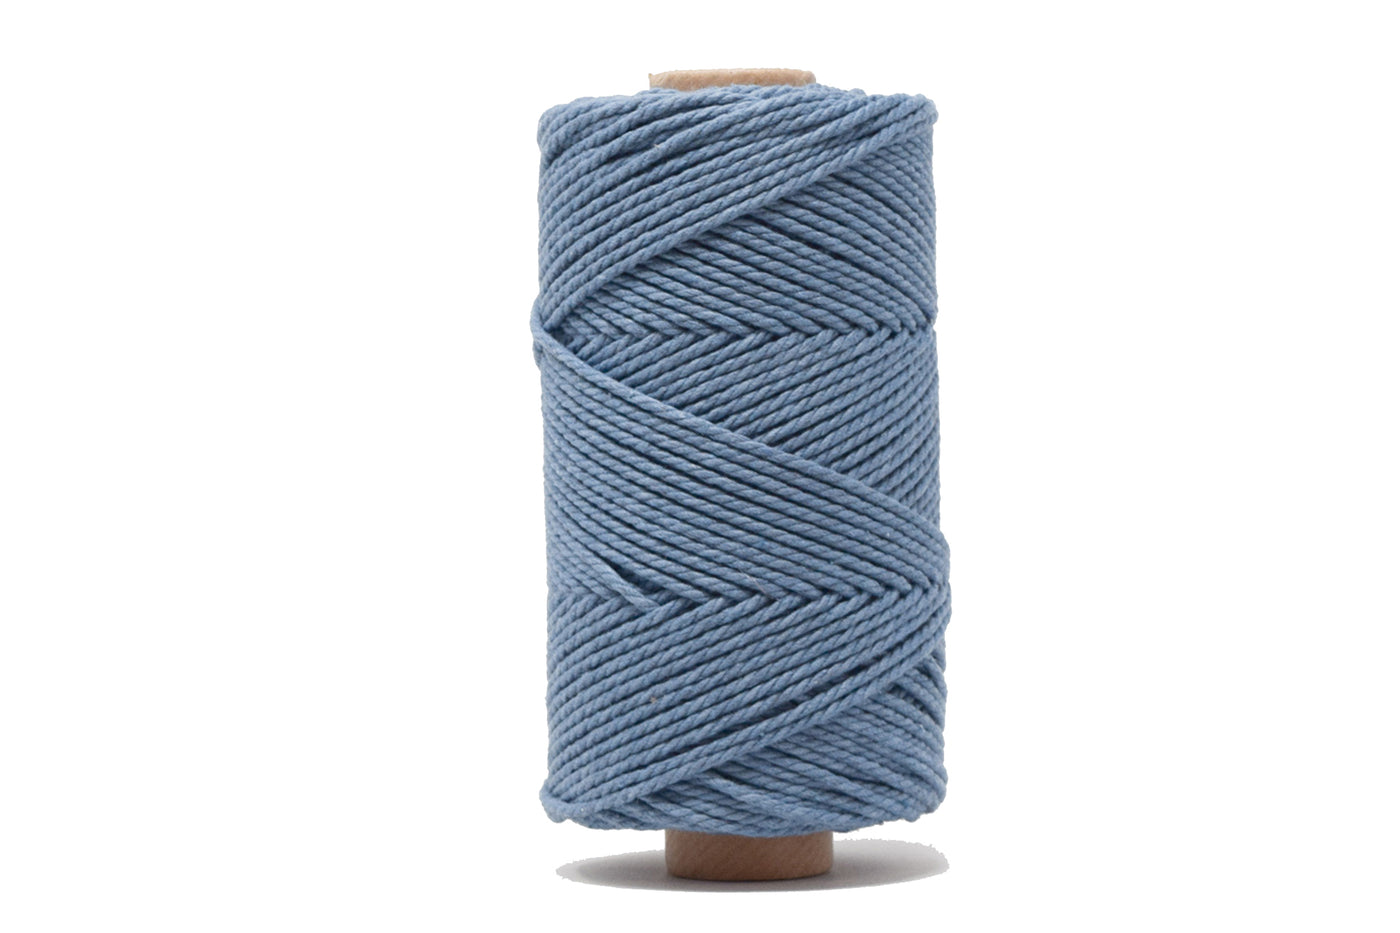 COTTON ROPE ZERO WASTE 2 MM - 3 PLY - BLUE JEANS COLOR